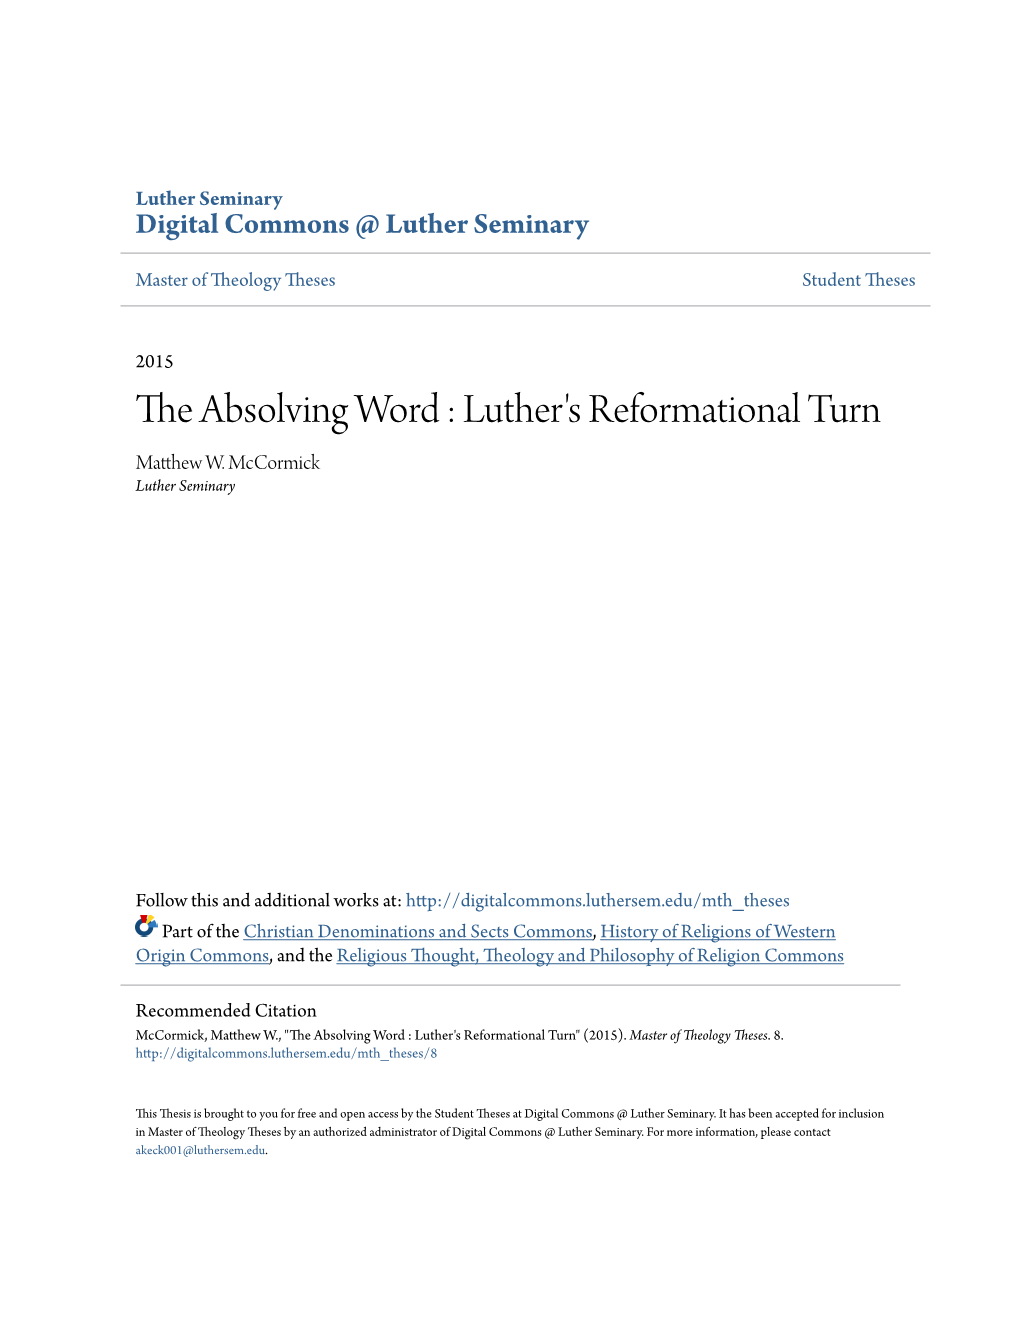 The Absolving Word : Luther's Reformational Turn Matthew .W Mccormick Luther Seminary